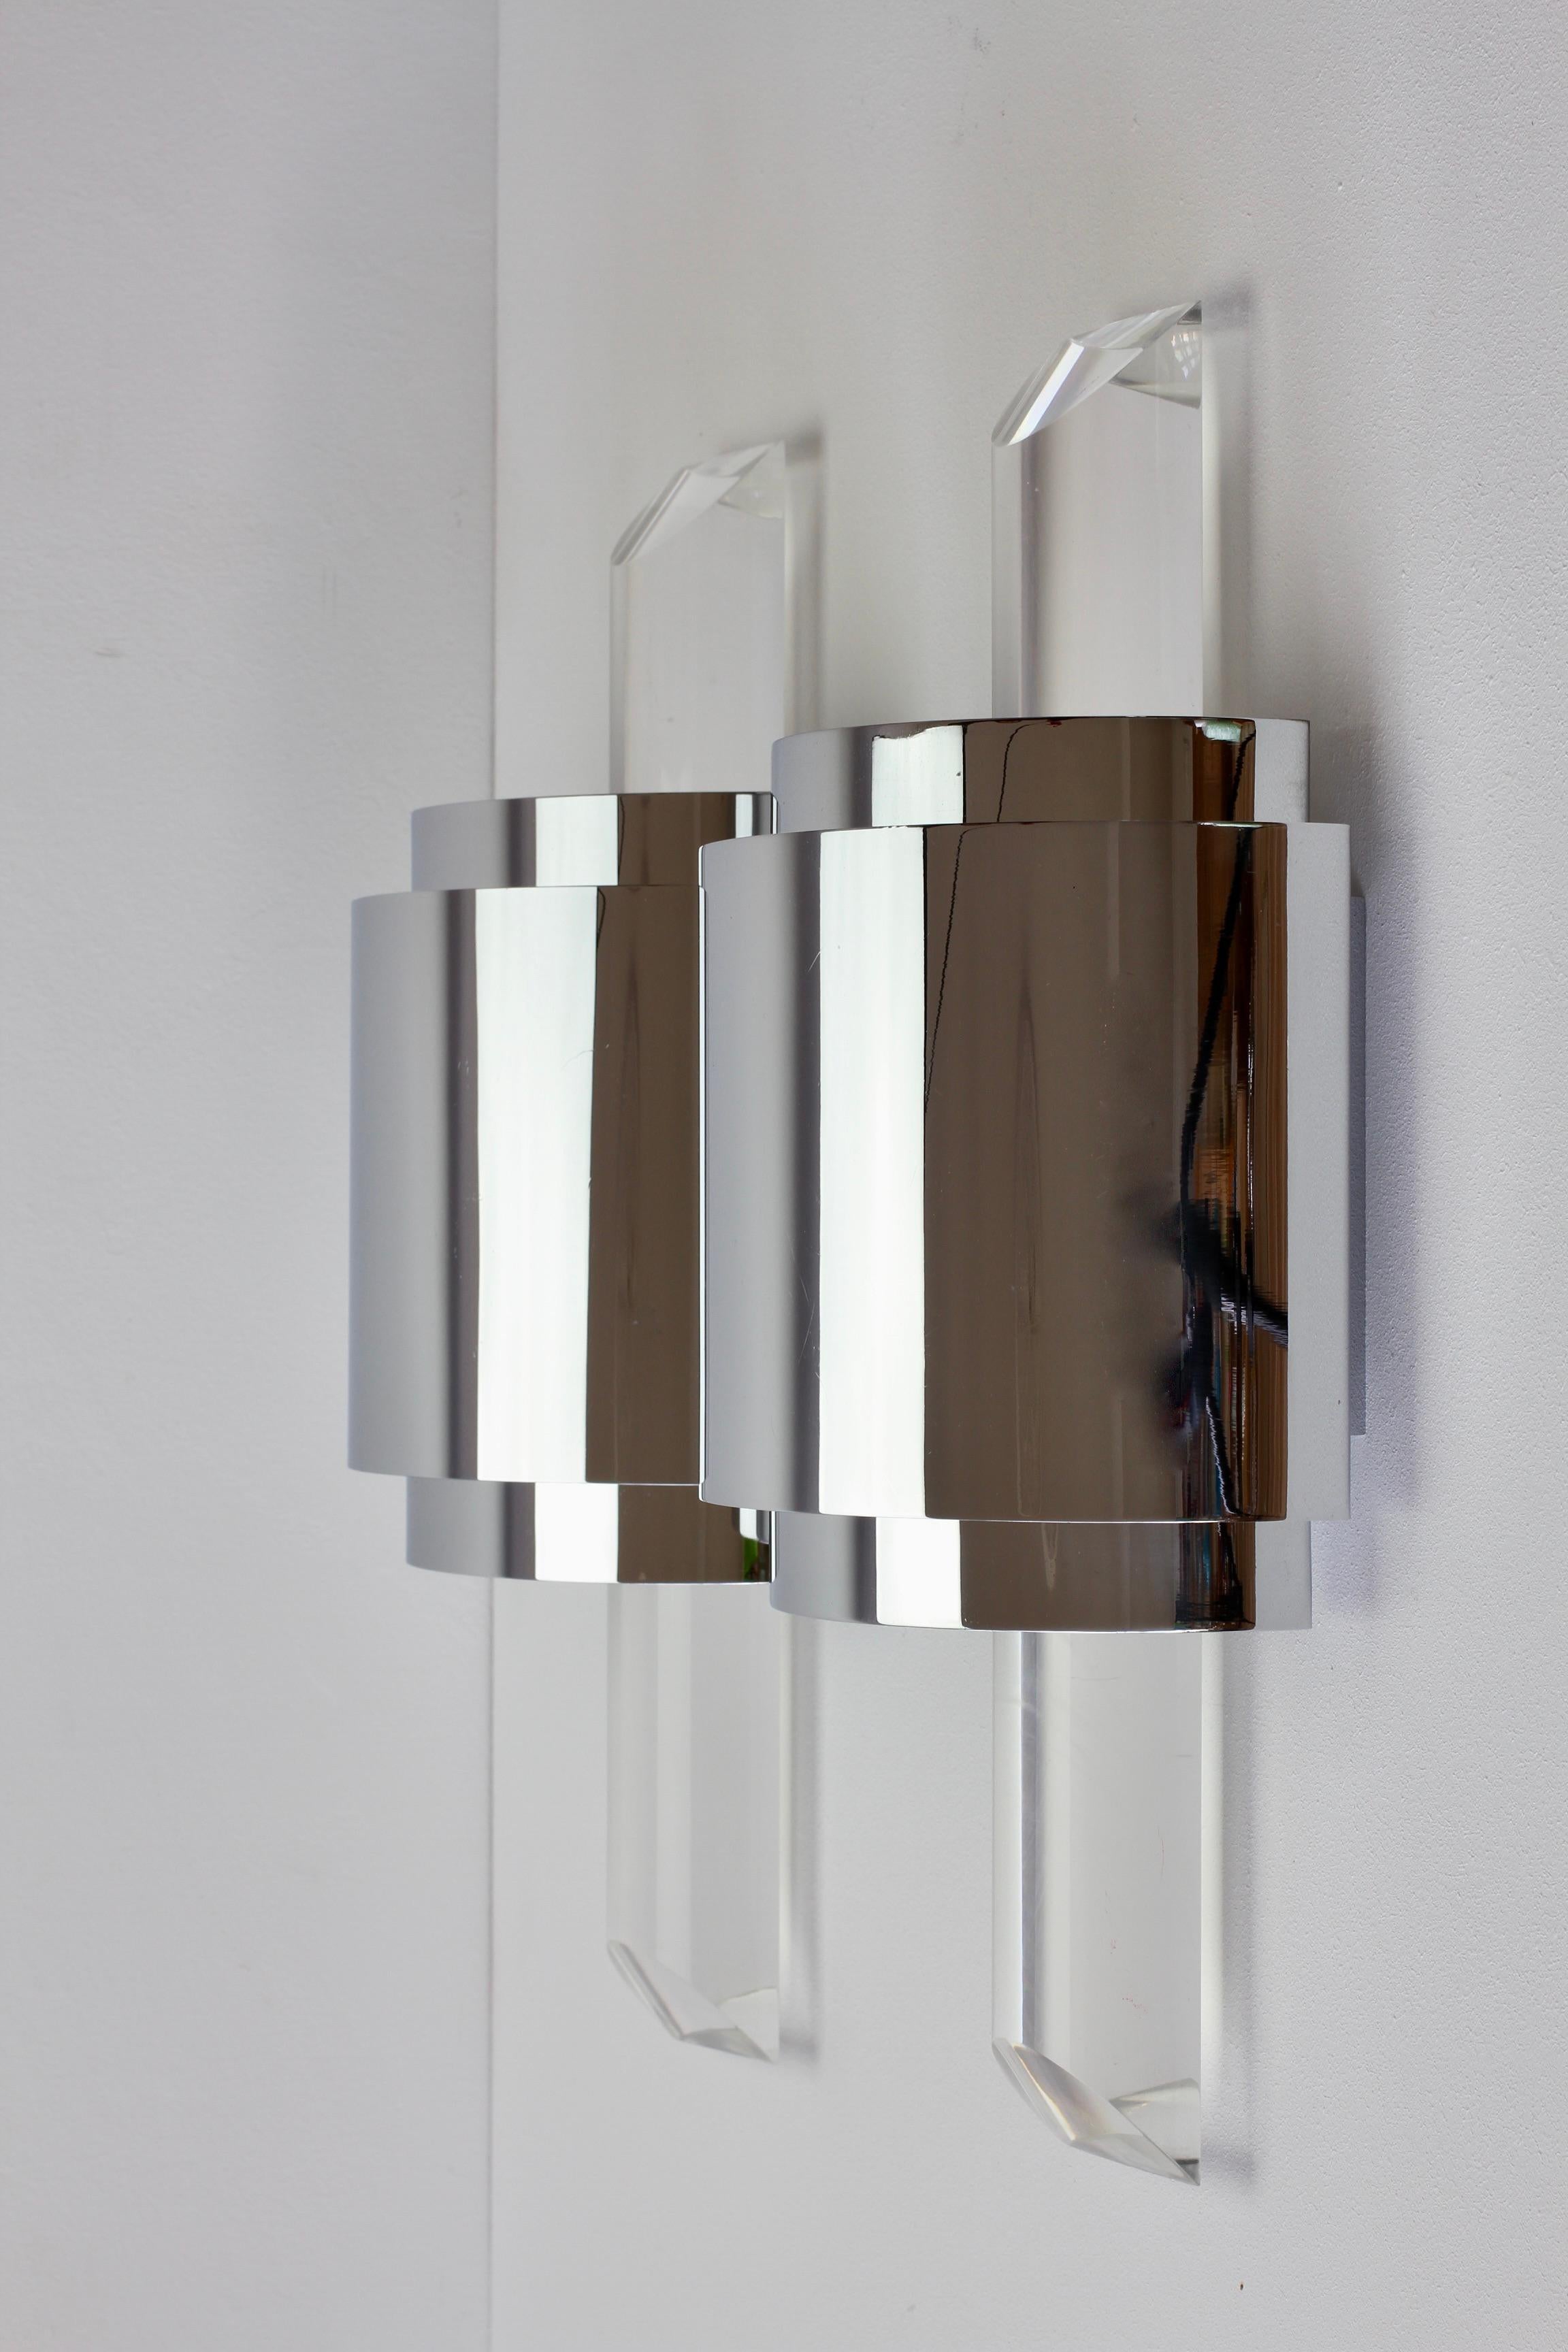 Large Hollywood Regency Lucite and Chrome Wall Lights or Sconces, circa 1970s For Sale 7